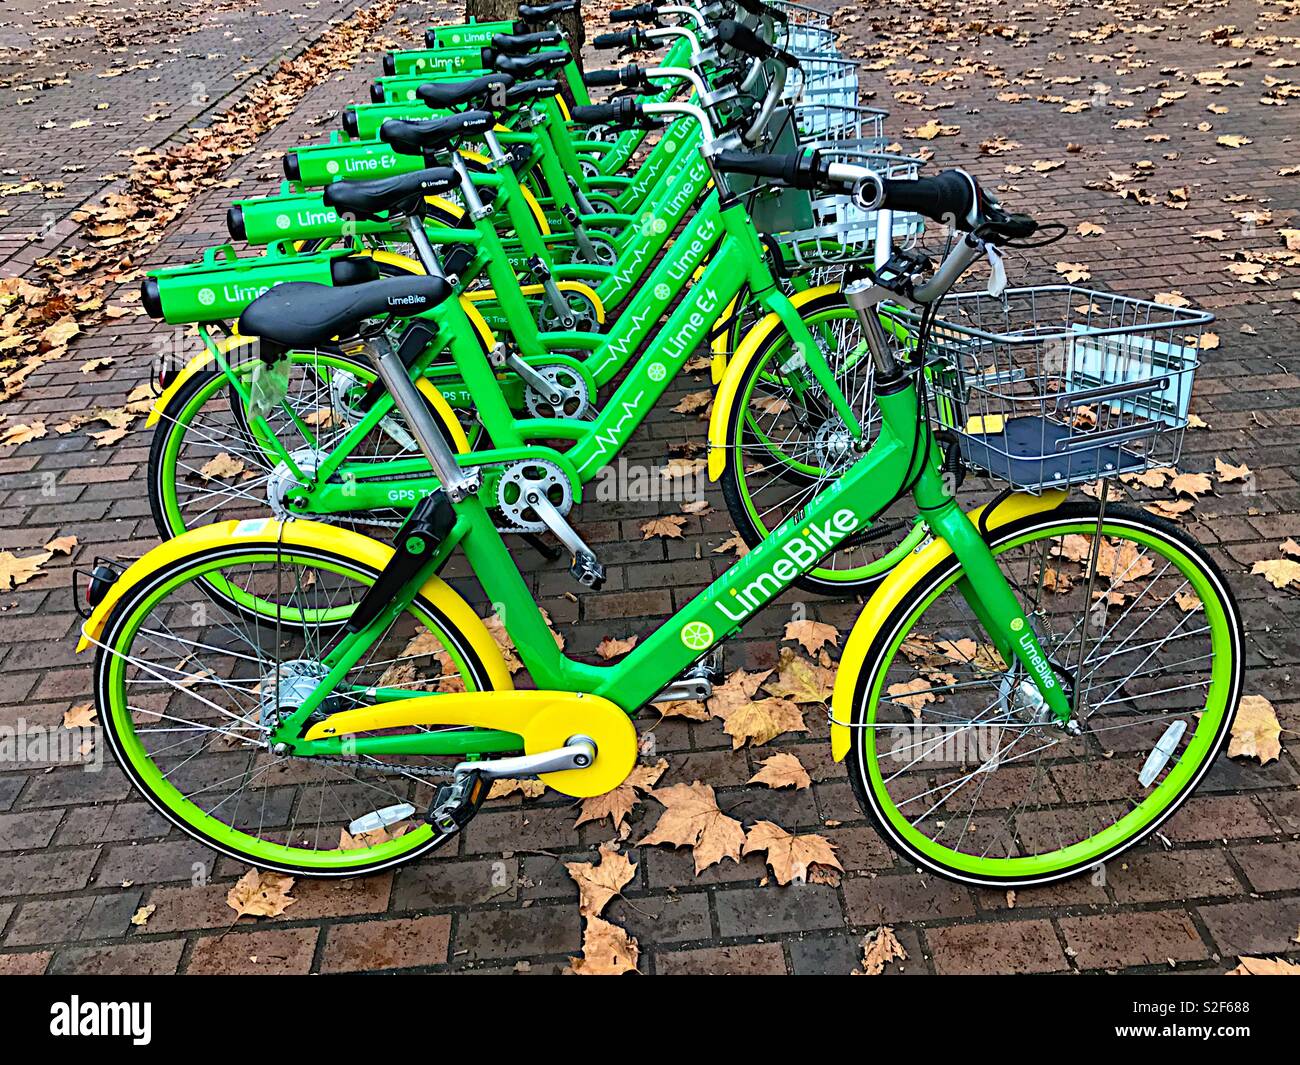 A row of Lime Bikes in Seattle Stock Photo - Alamy